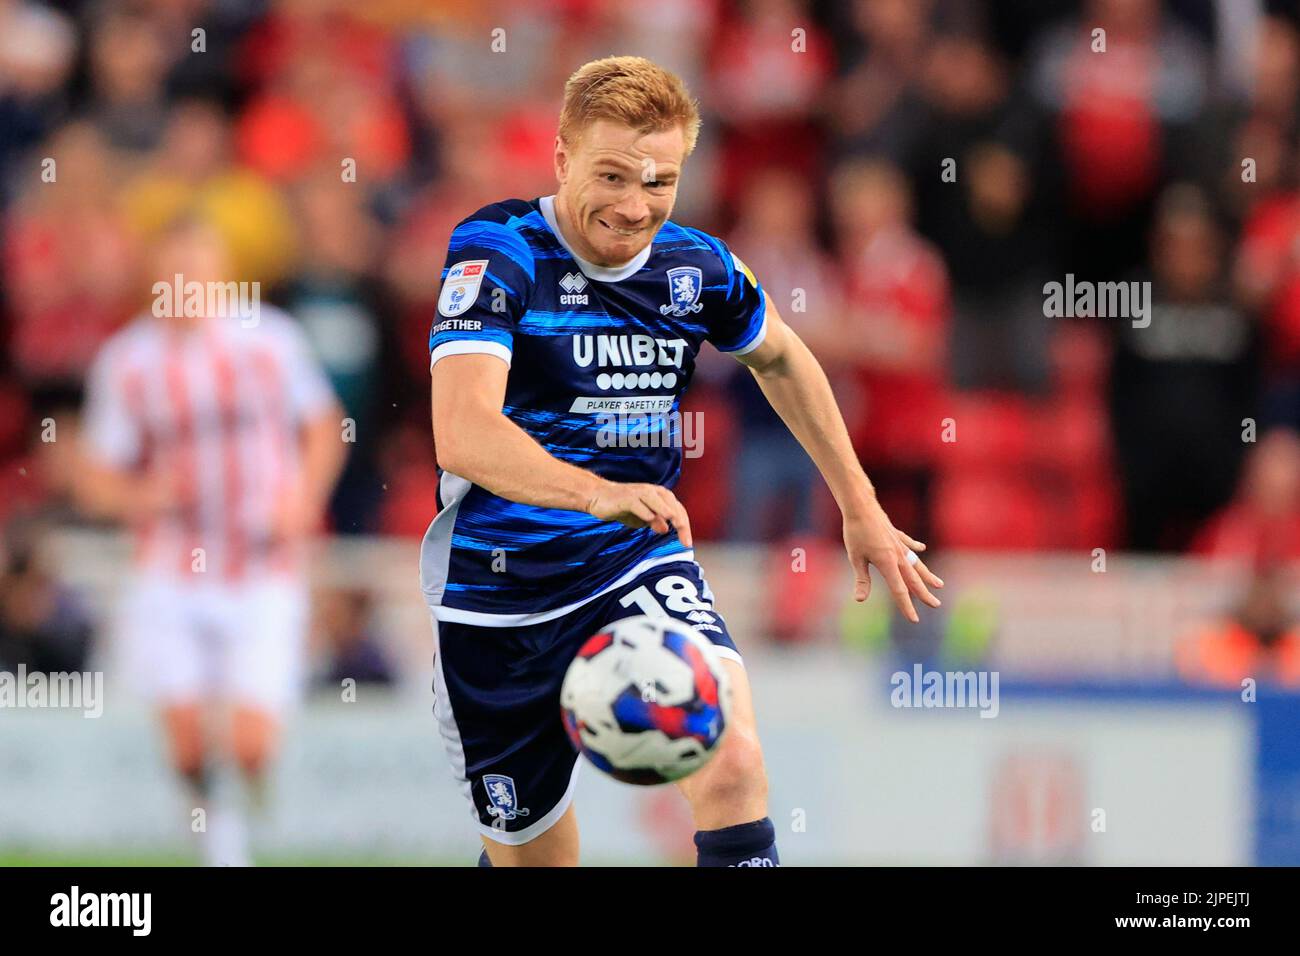 Duncan Watmore #18 of Middlesbrough runs with the ball Stock Photo